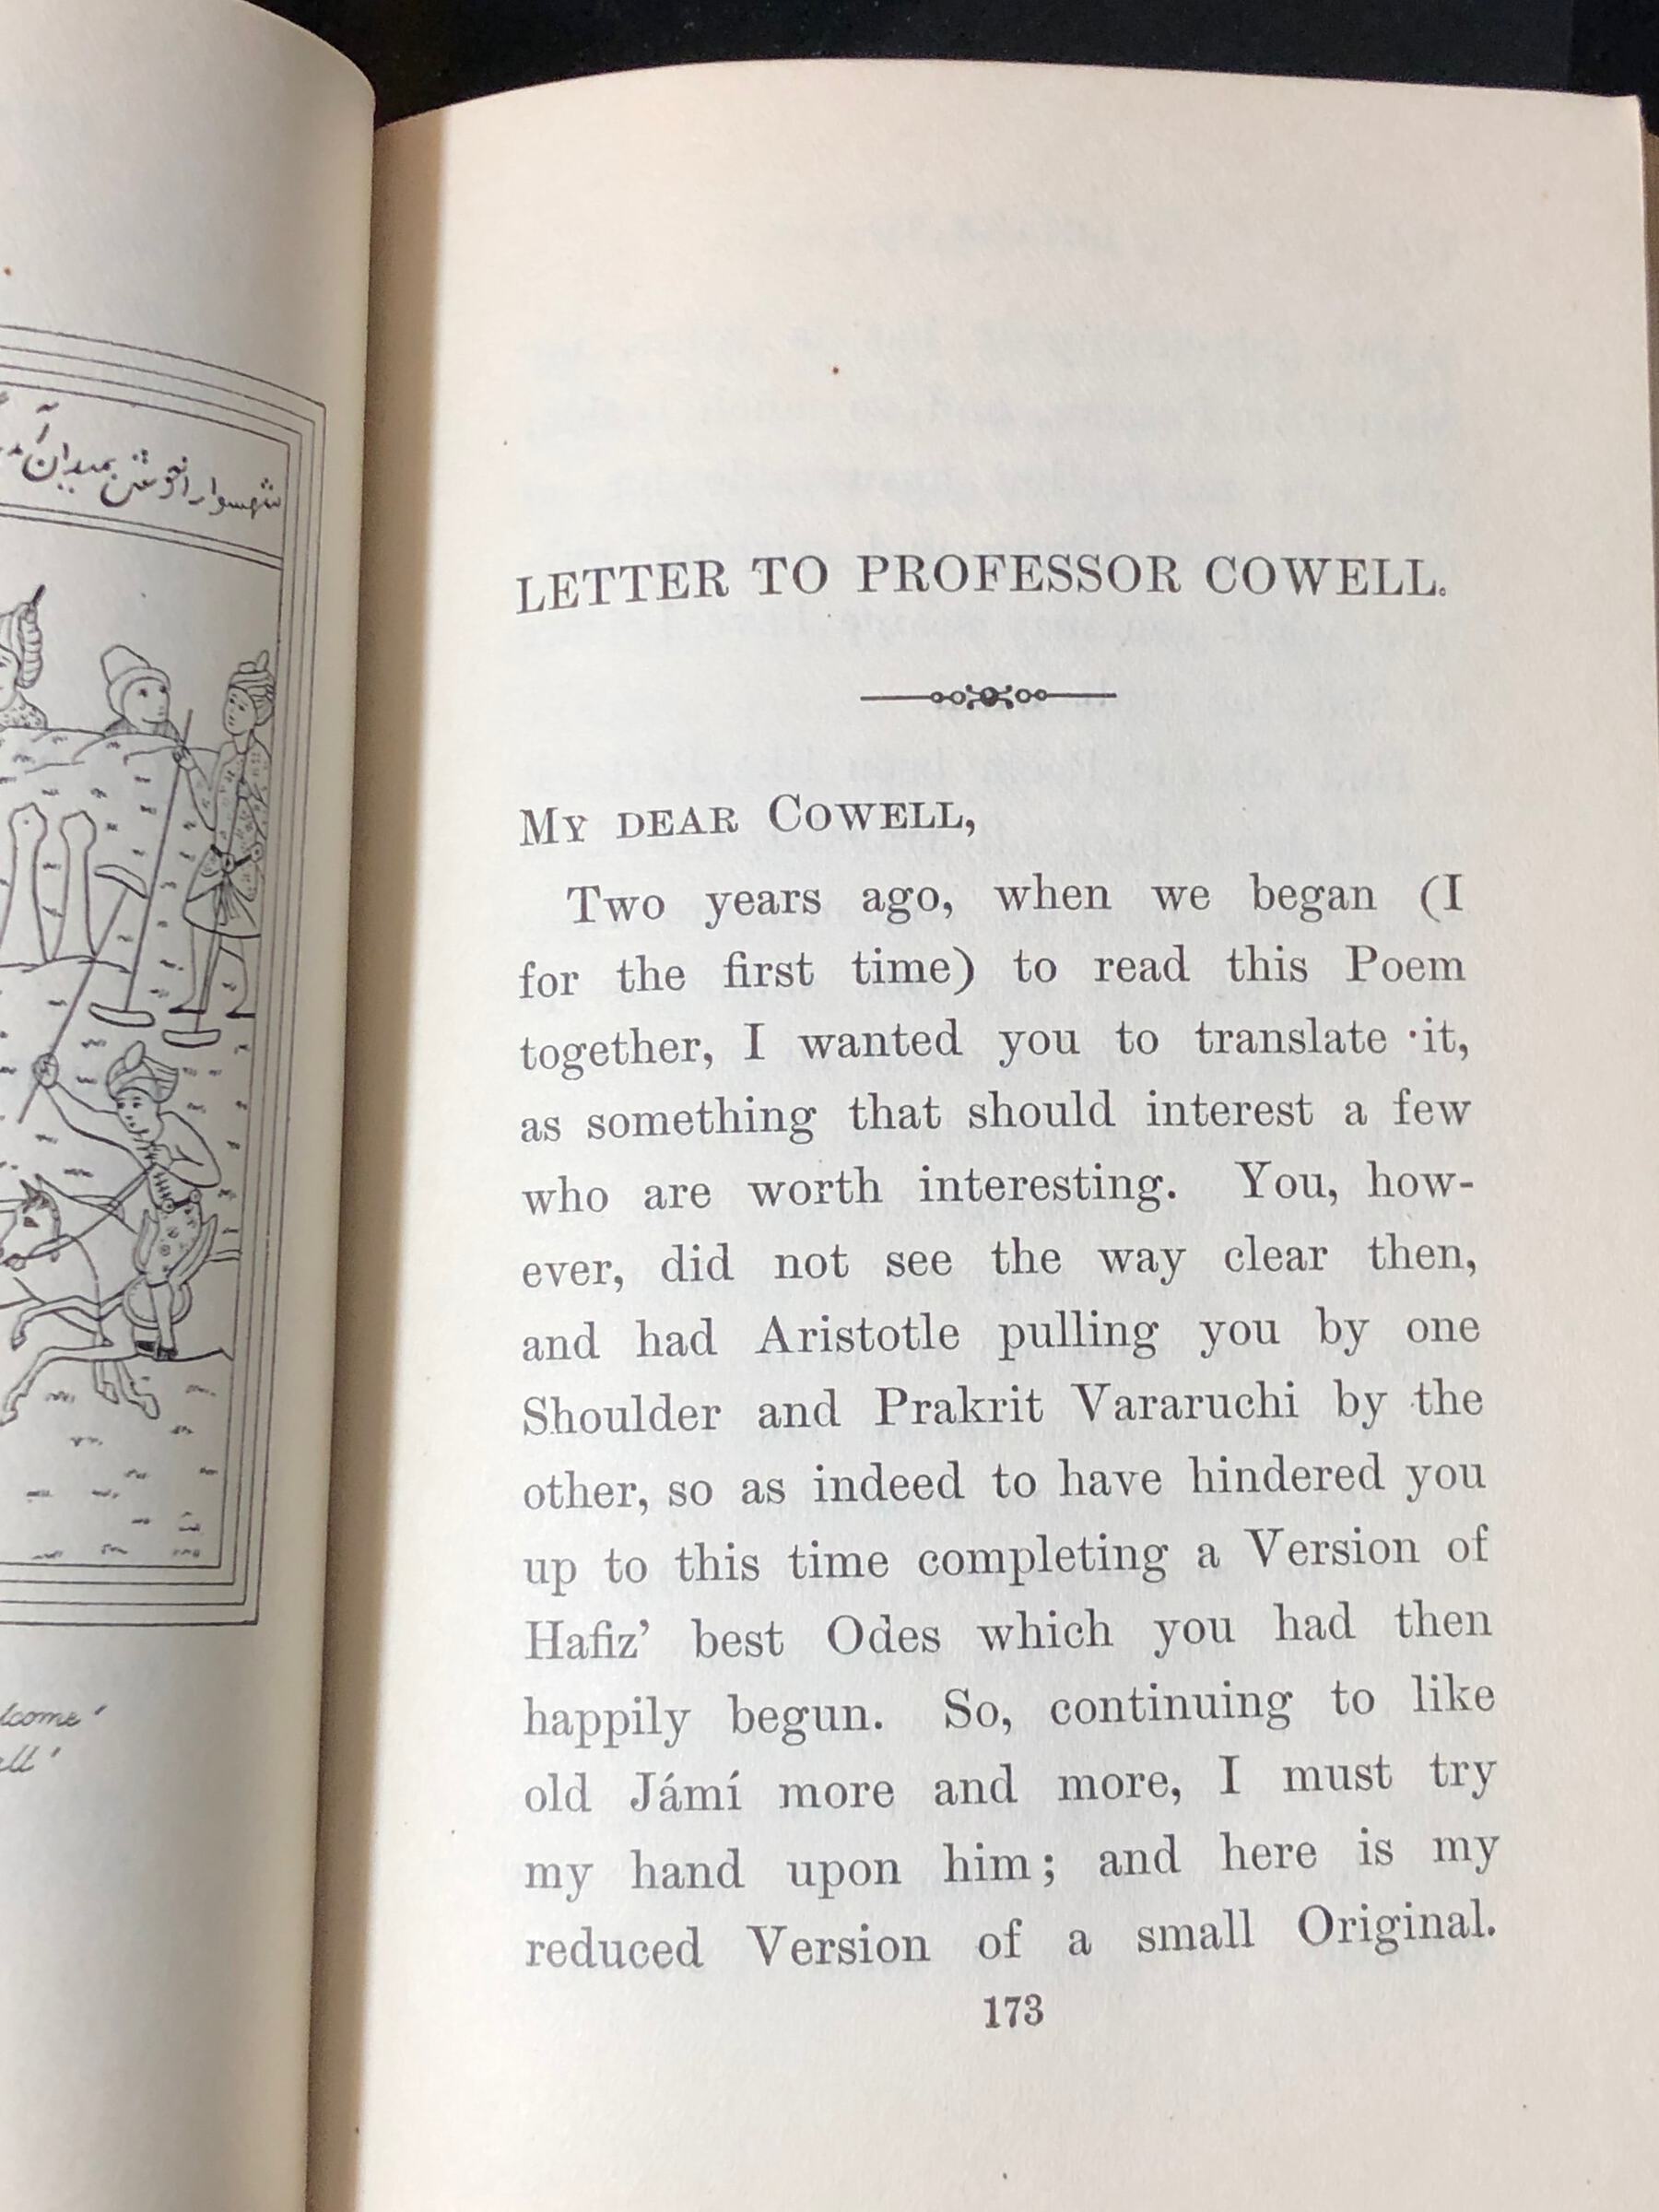 Letter to Professor Cowell